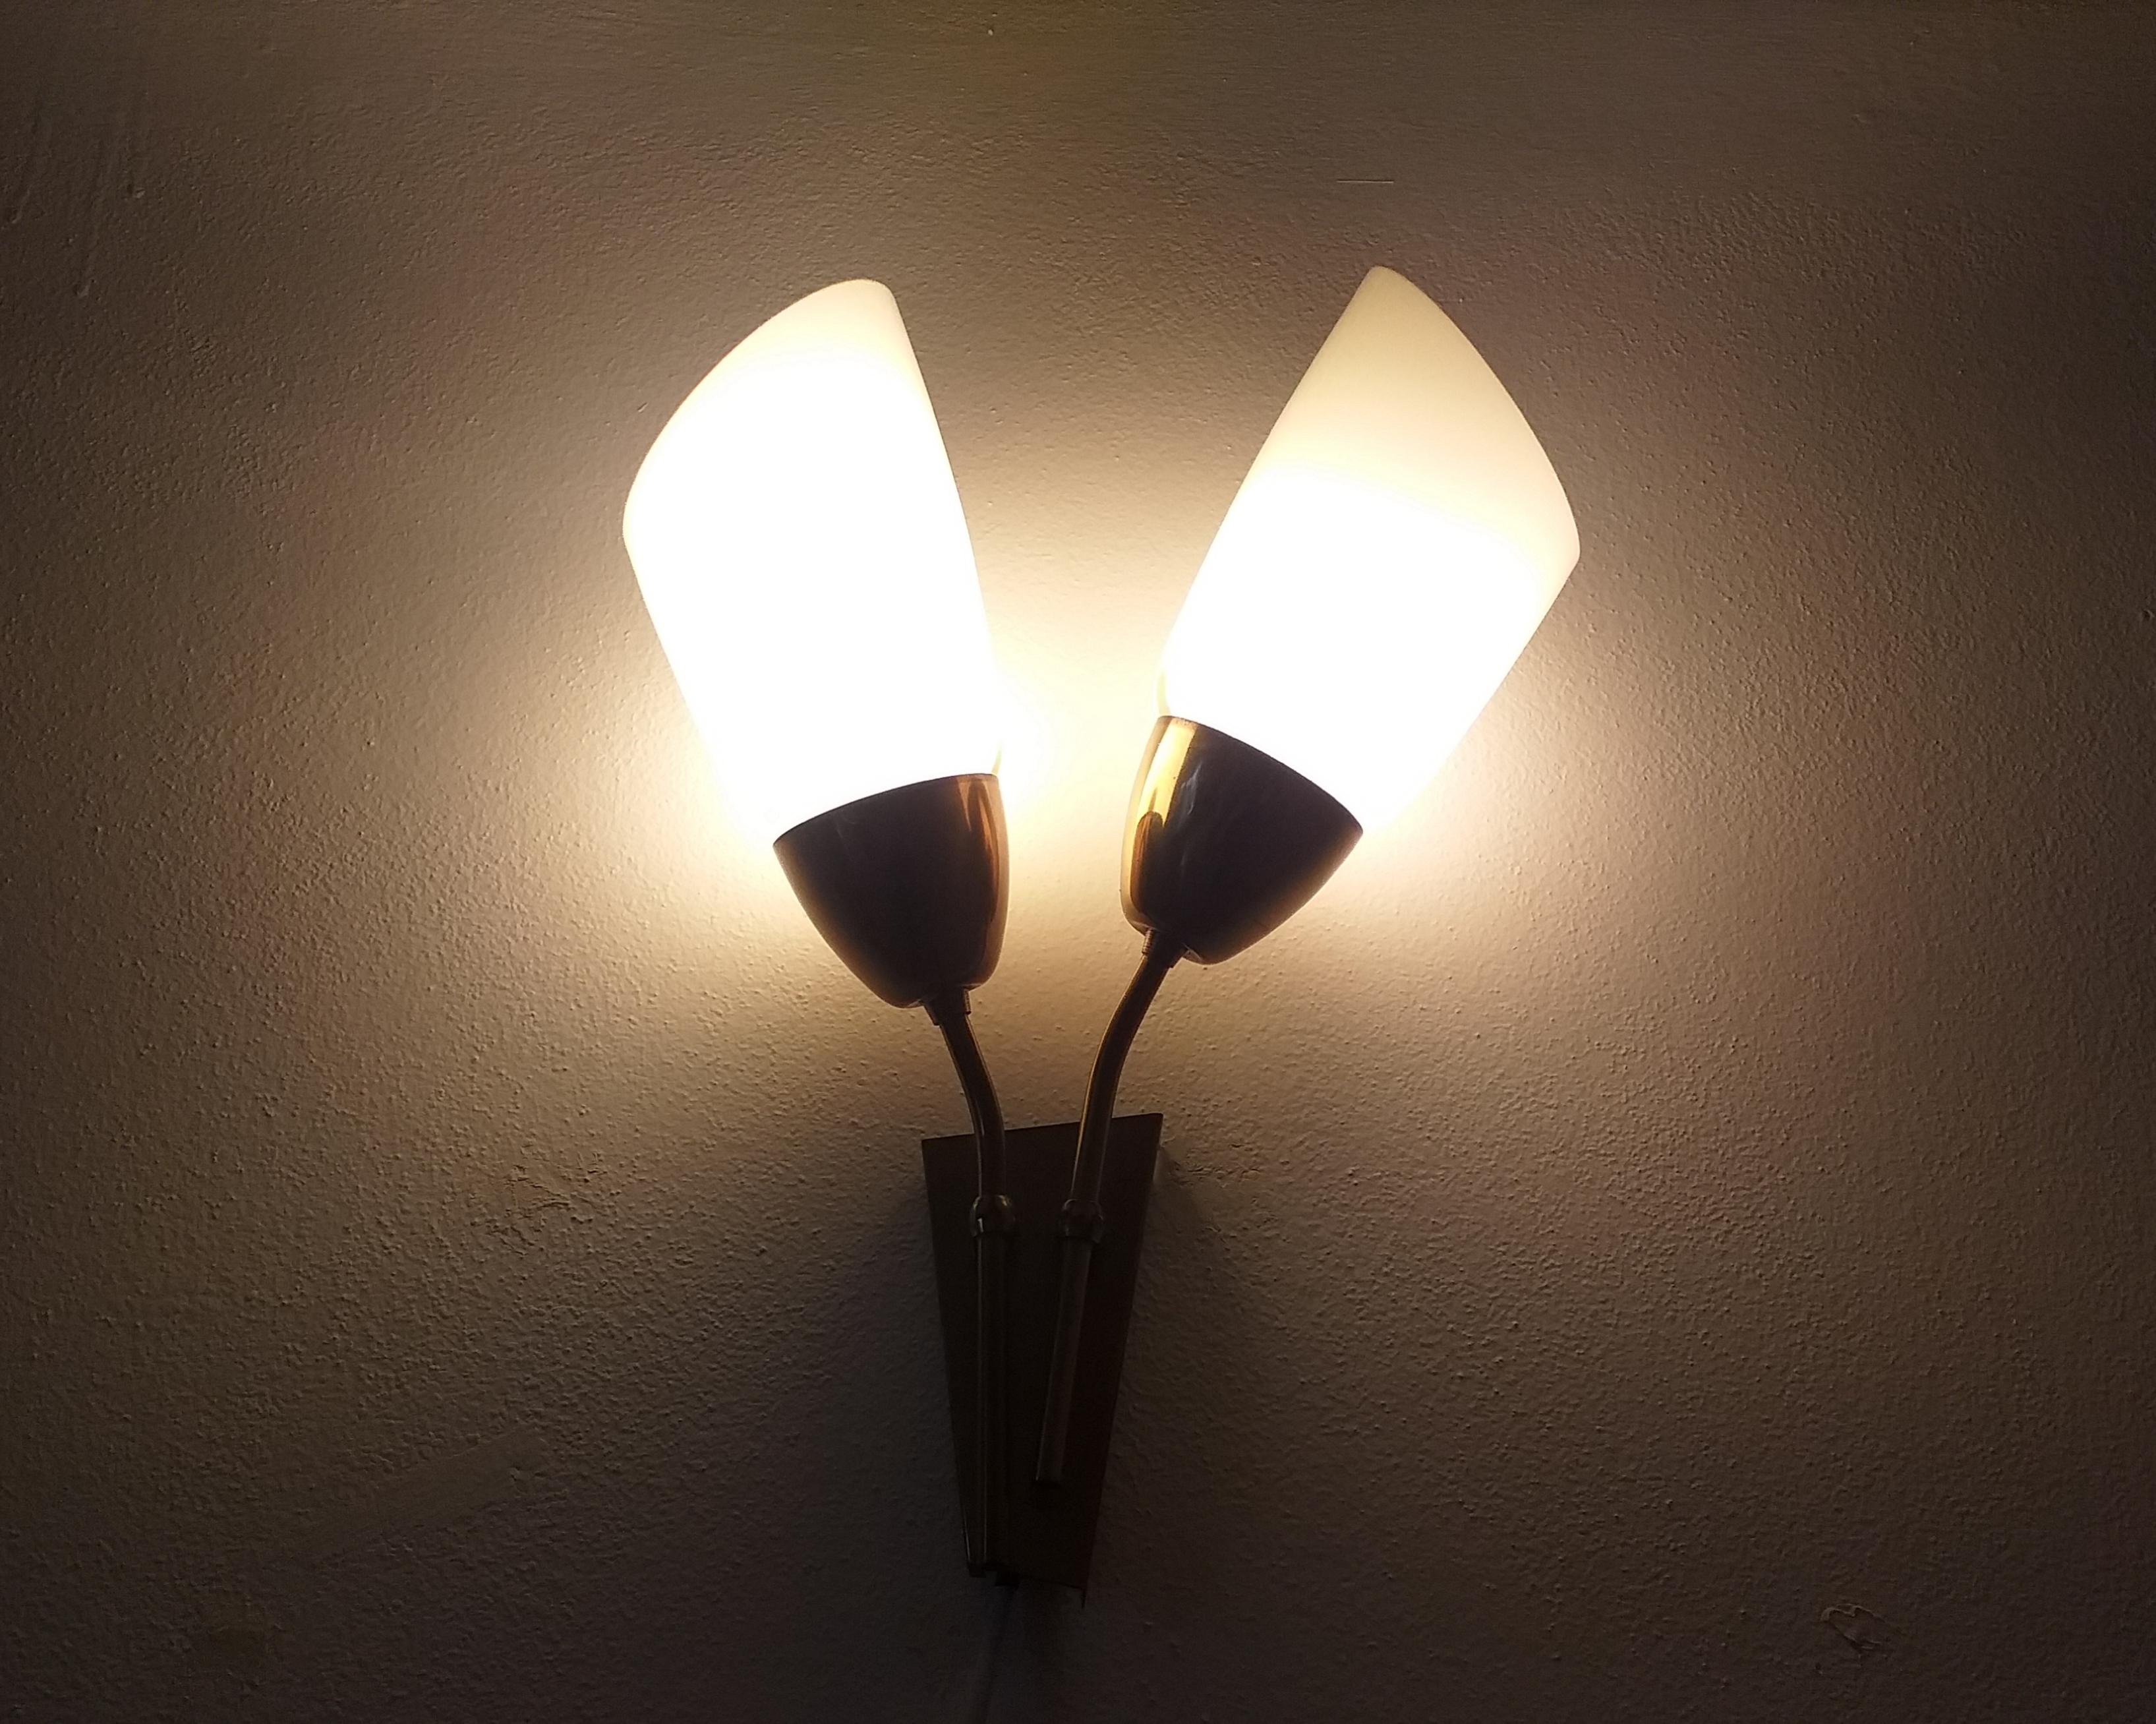 Pair of Midcentury Wall Lamps Kamenicky Senov, 1970s For Sale 4